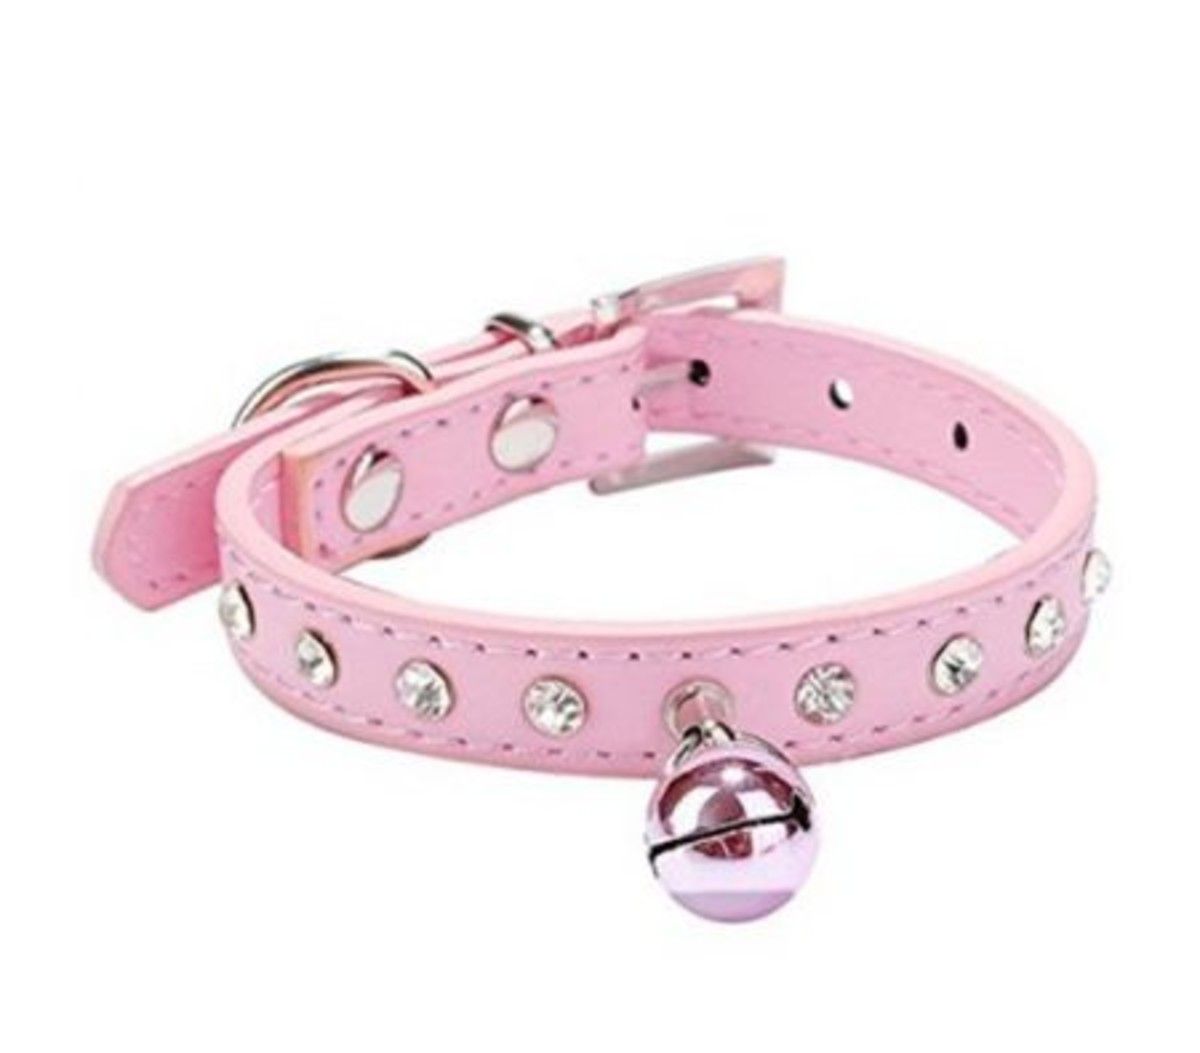 Bell Collars Puppy Dog Cat Safety Accessories Pet Supplies-pink